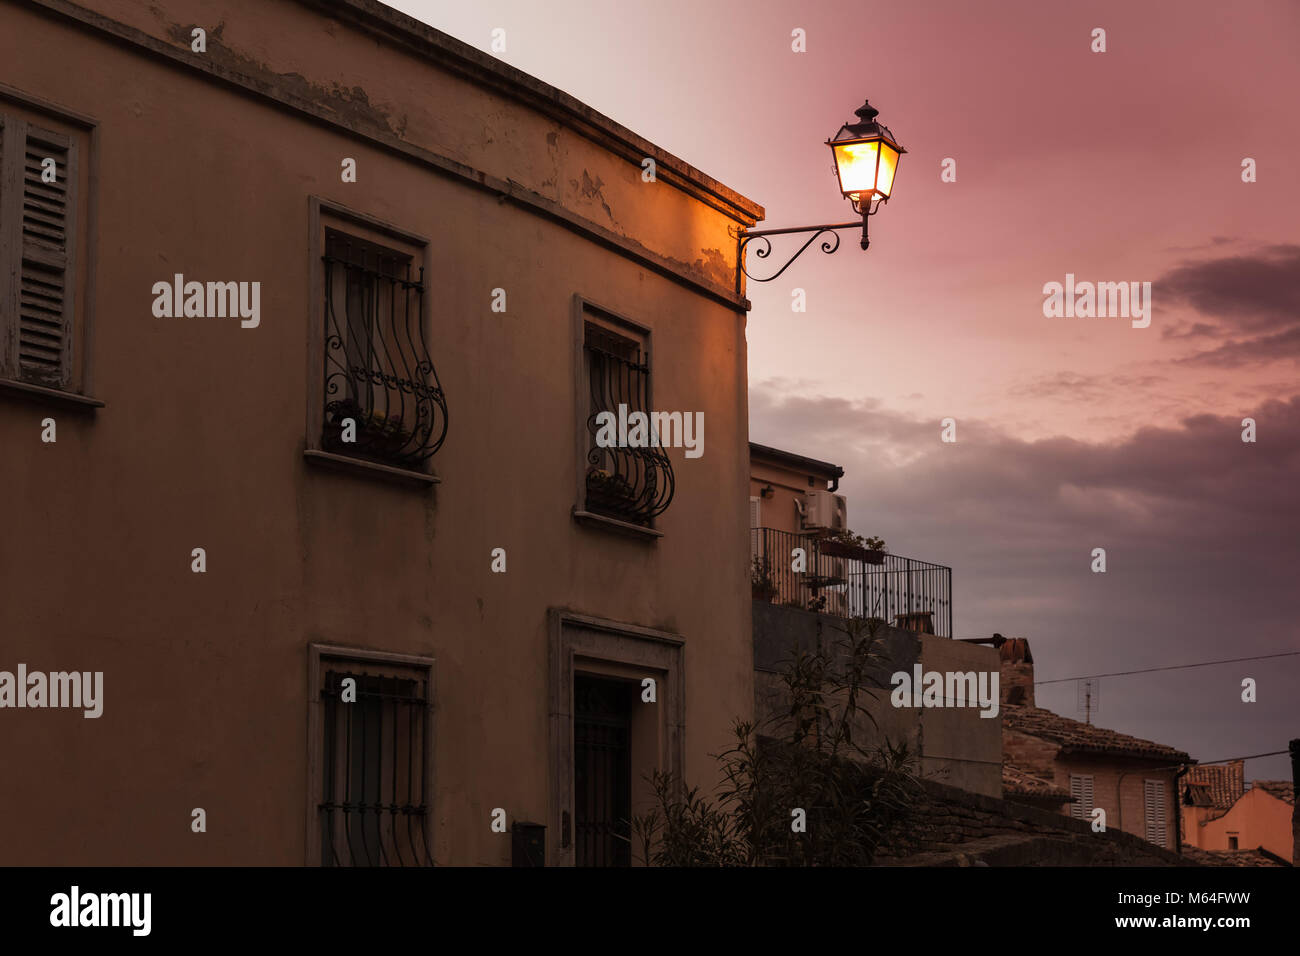 Evening street view with streetlight, Fermo old town, Italy Stock Photo